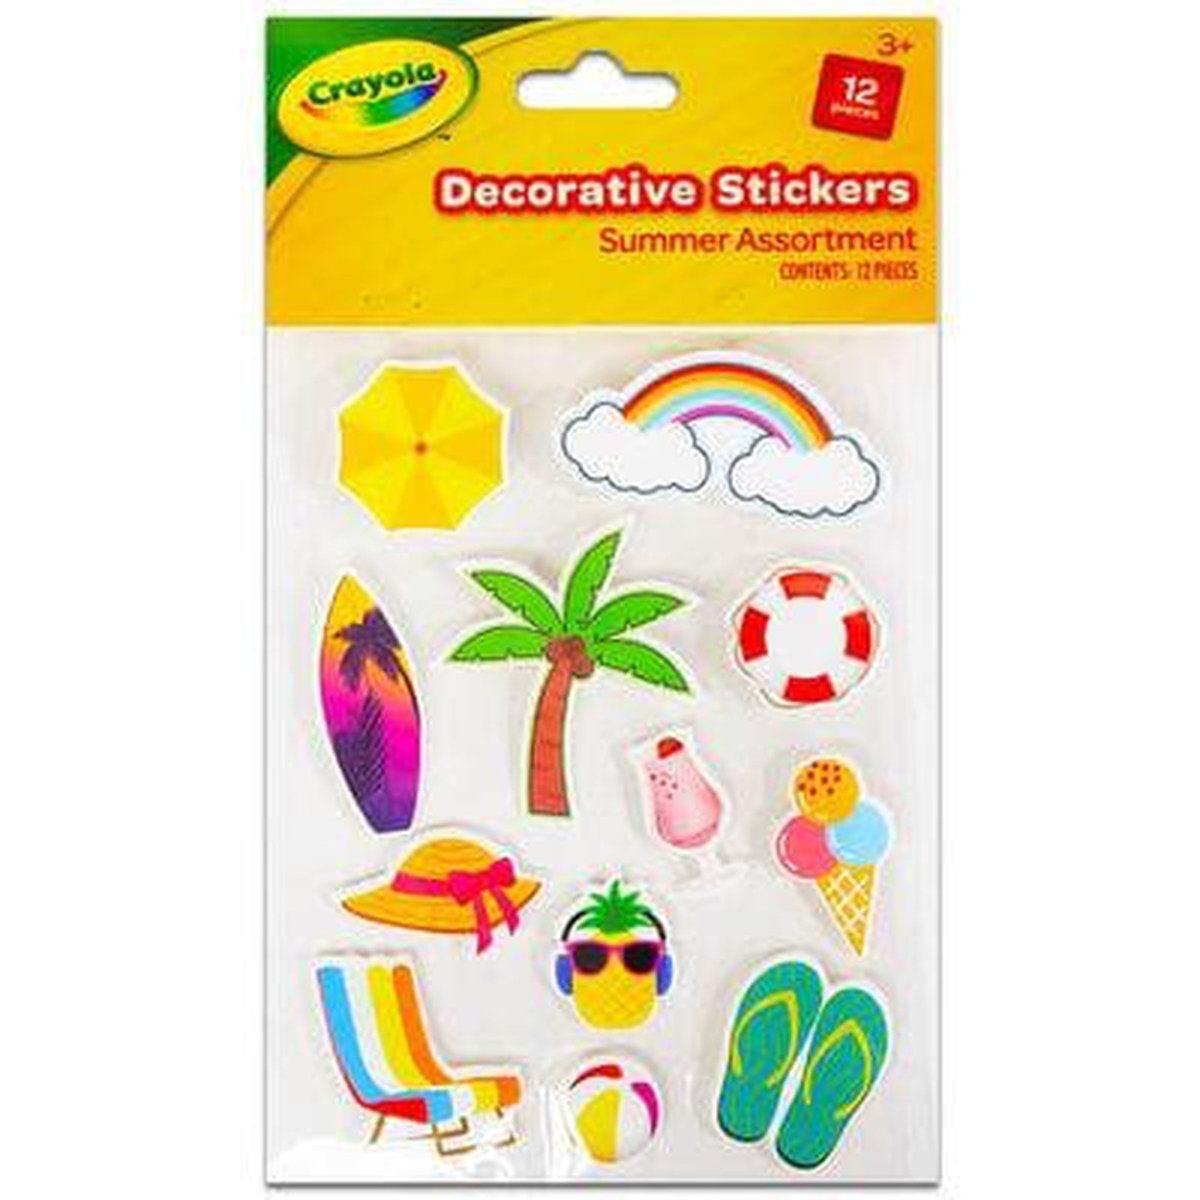 Crayola Decorative Summer Stickers: Pack of 12 - Kids Party Craft